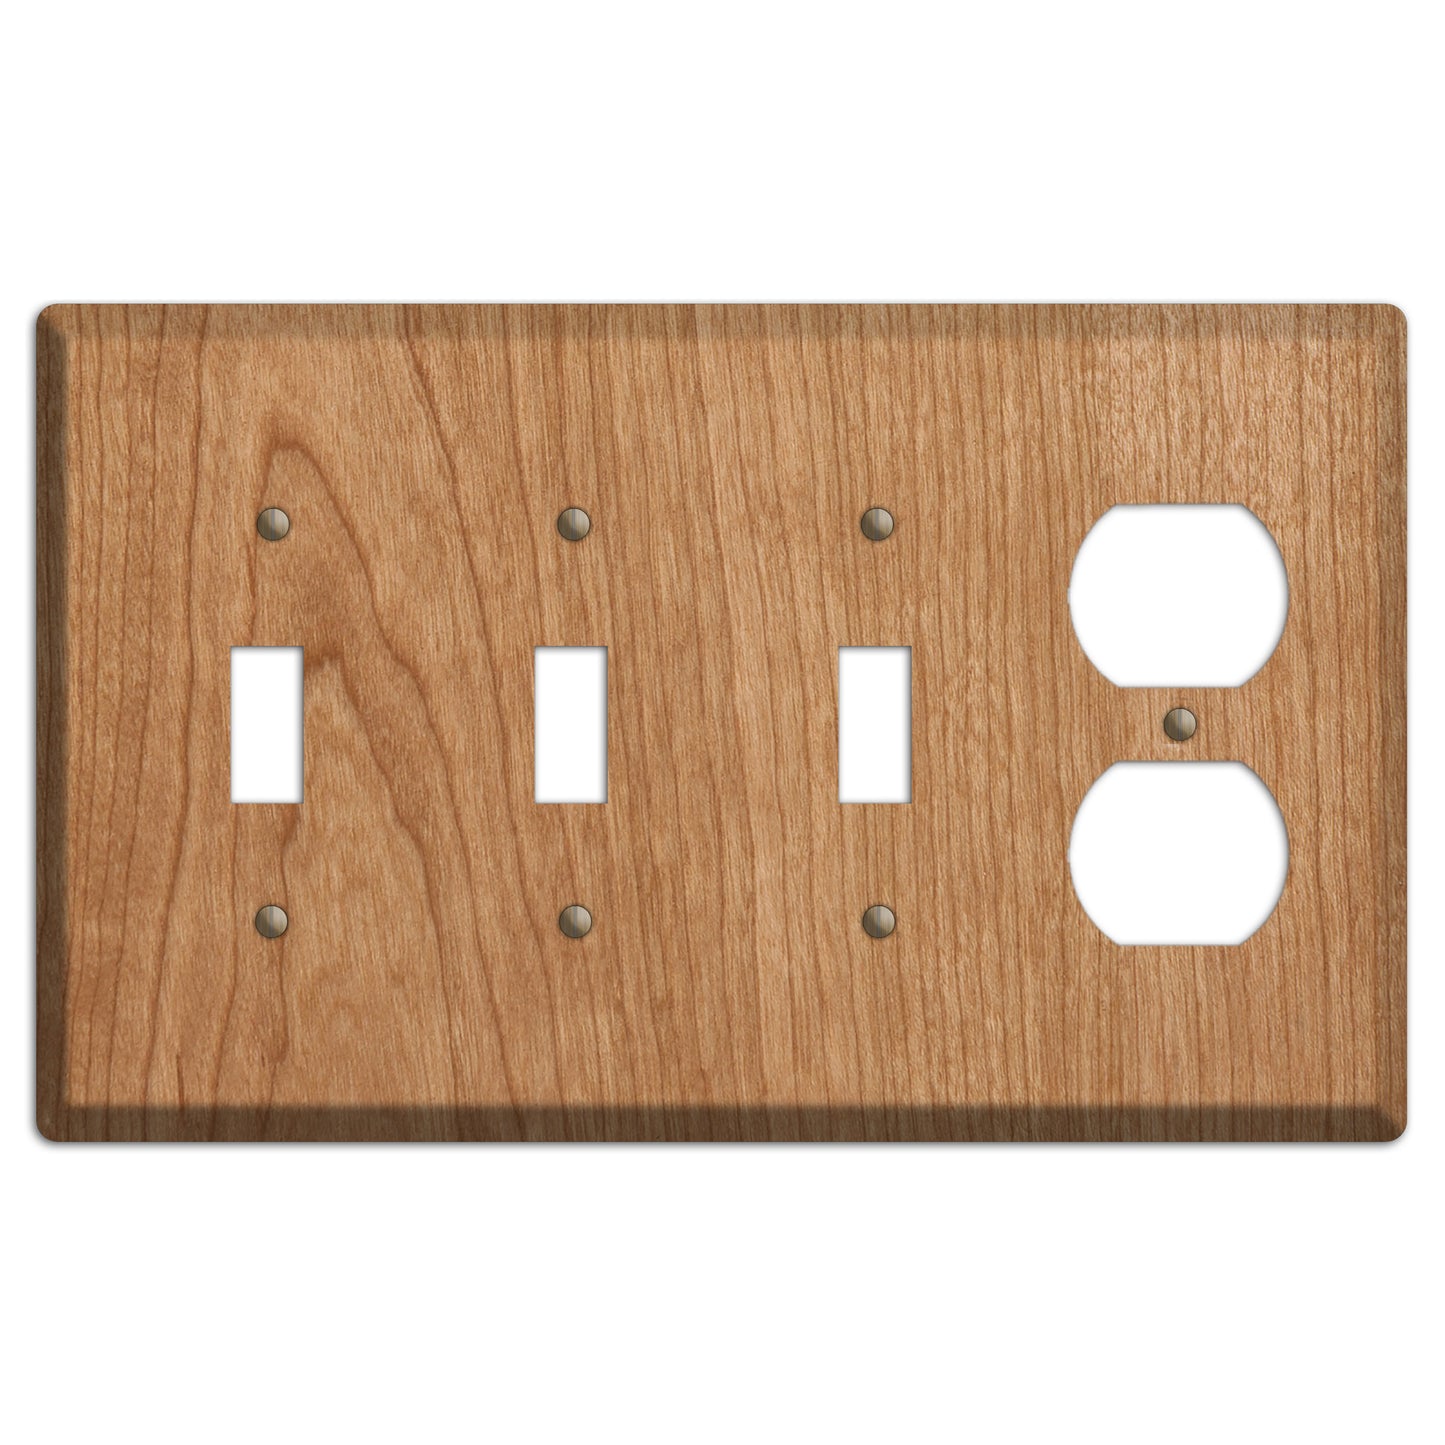 Unfinished Cherry Wood 3 Toggle / Duplex Outlet Cover Plate